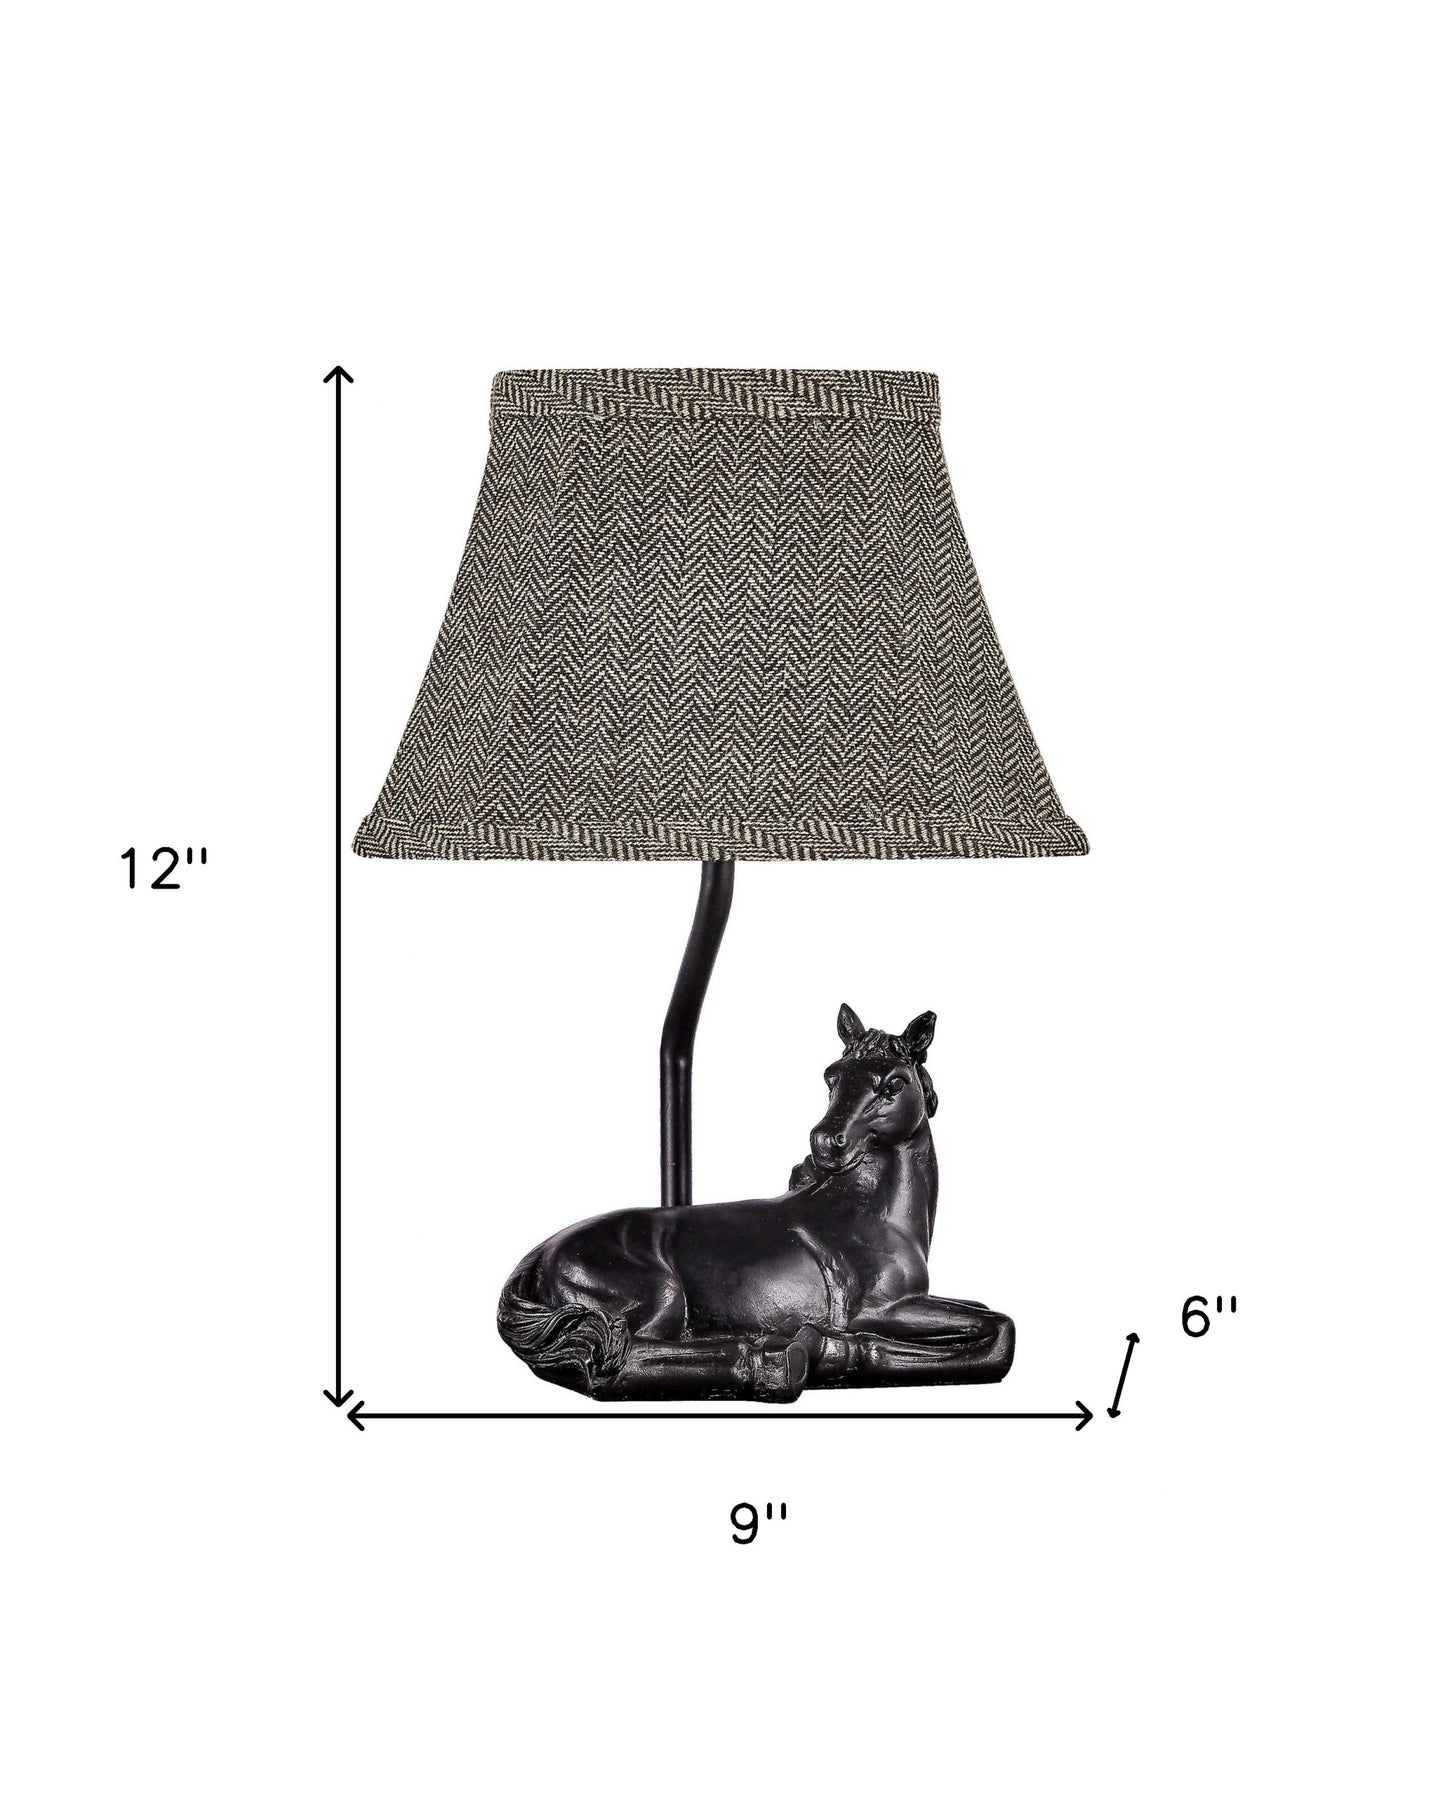 Horse Rests Peacefully Accent Lamp